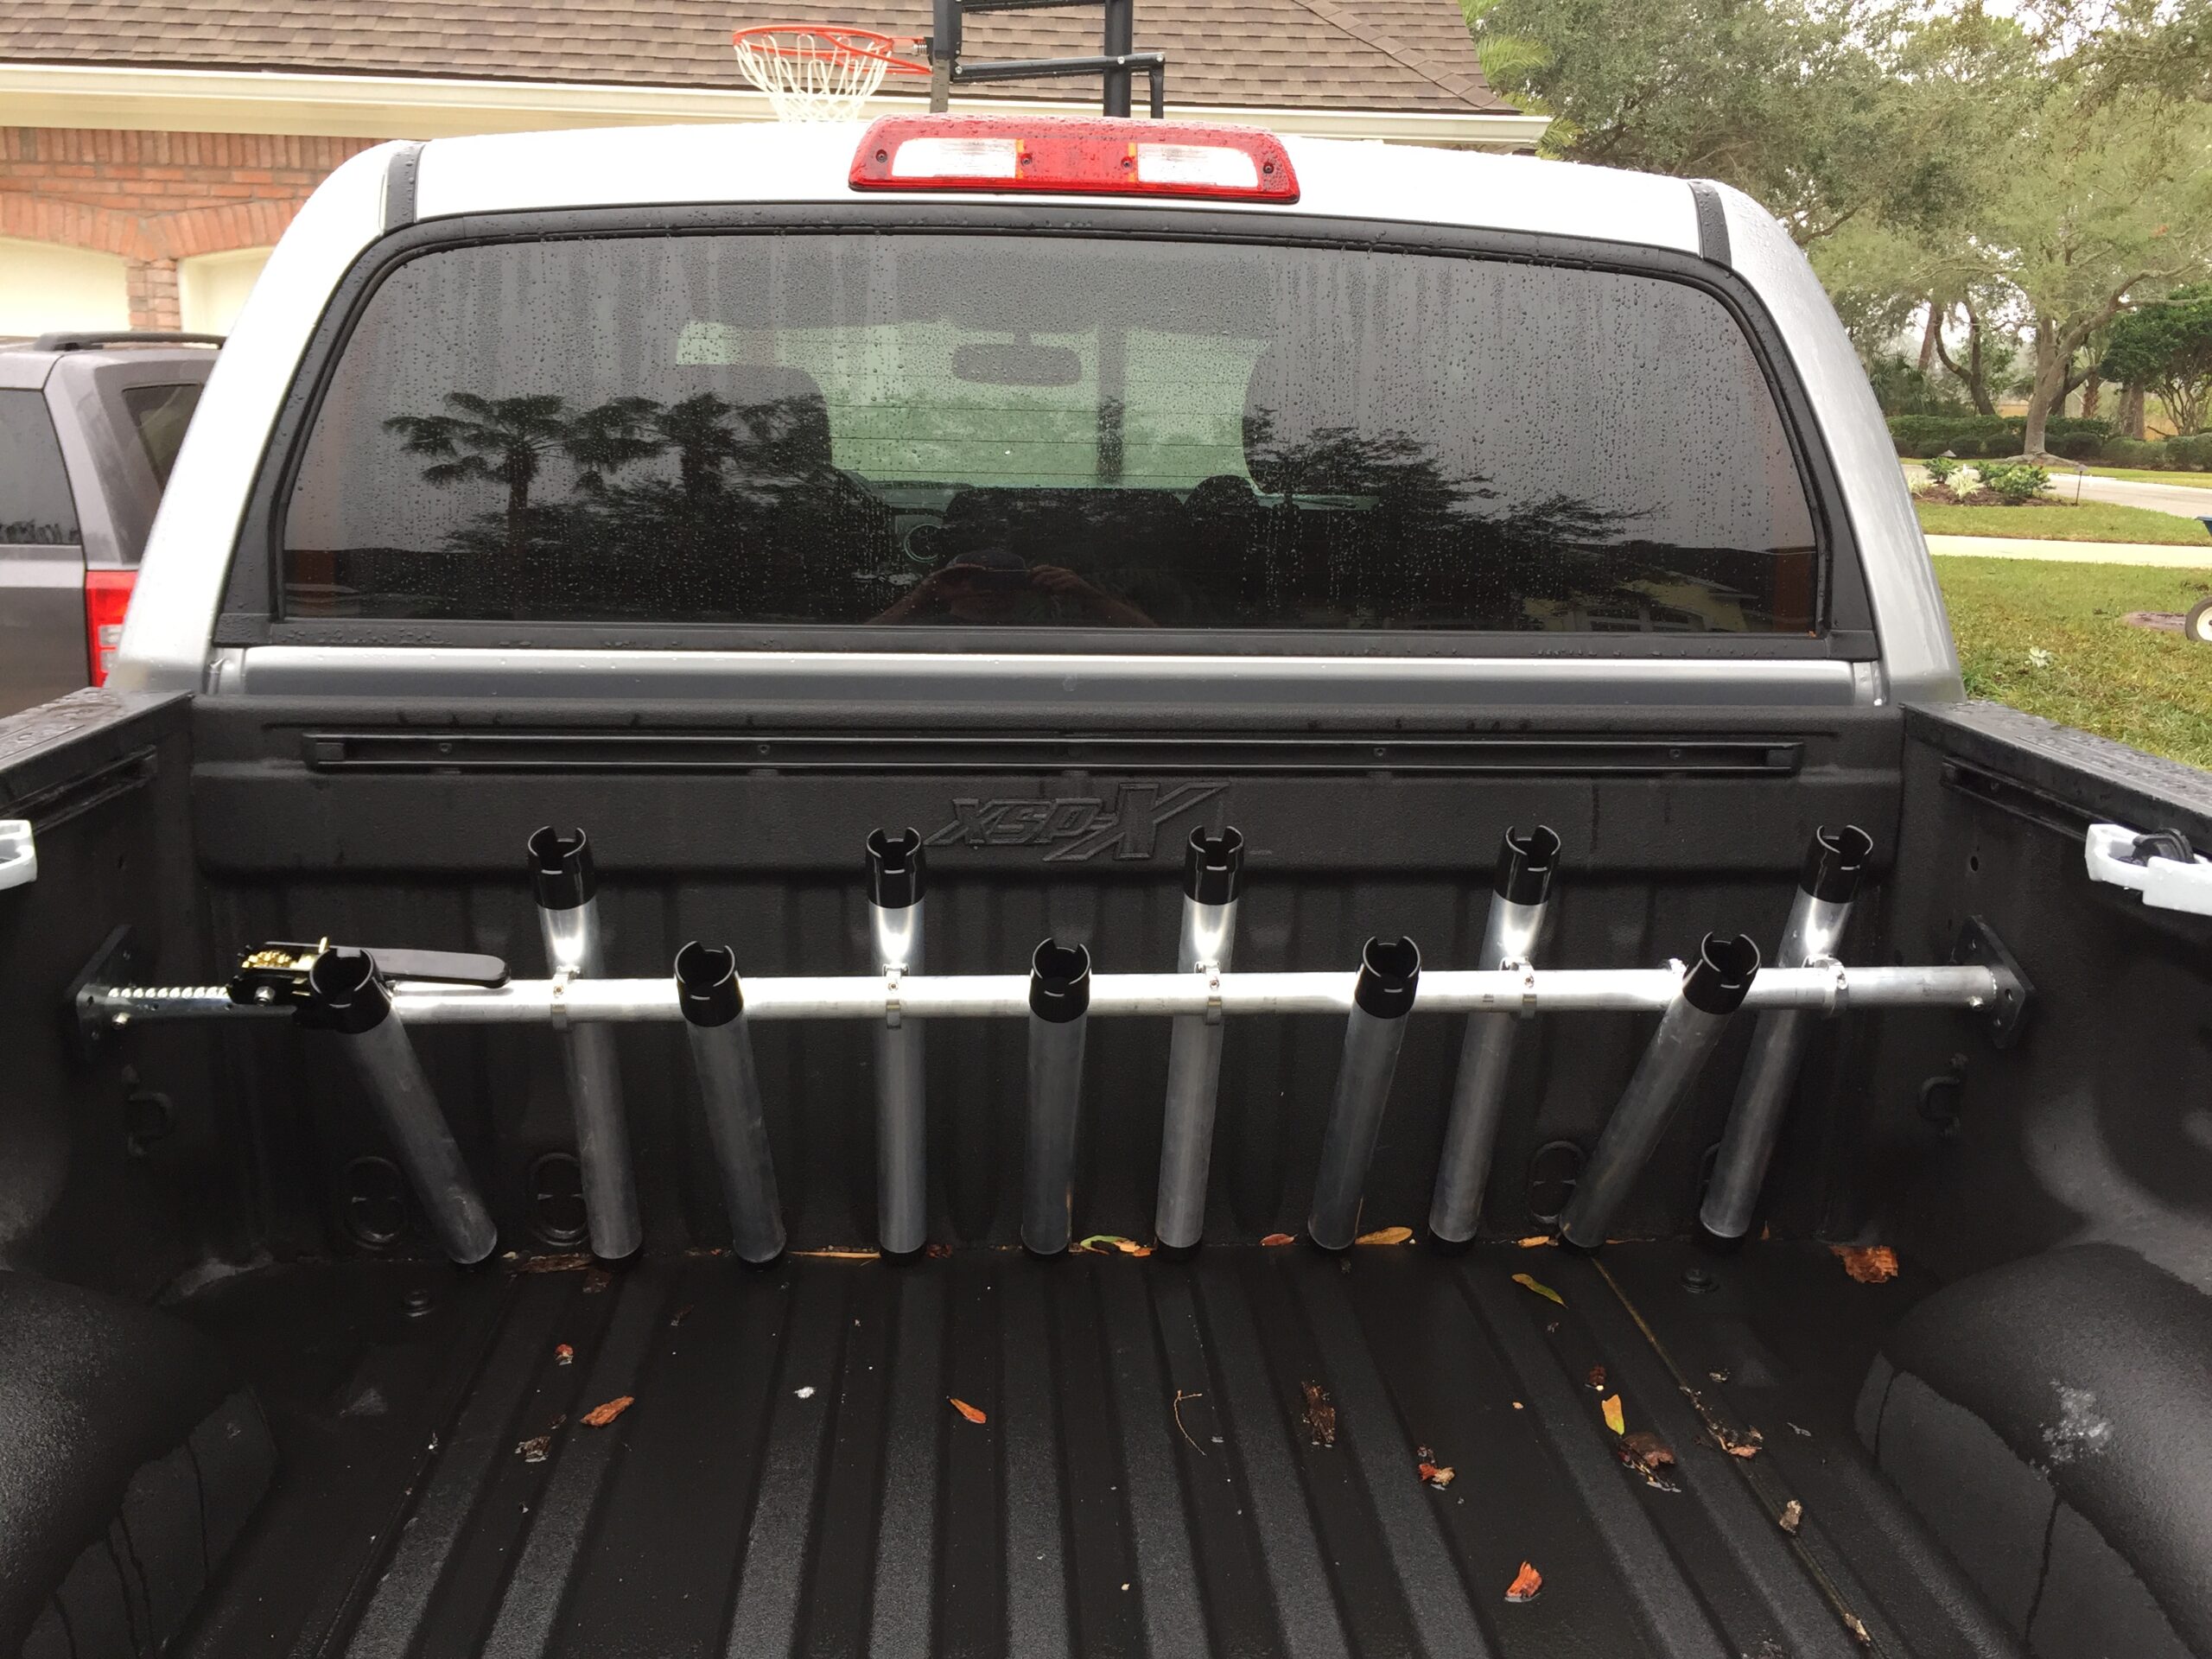 Portarod Offshore Rod Holder for the truck bed additional rod holders have been added to fishing rod rack for truck bed #portarod_racks